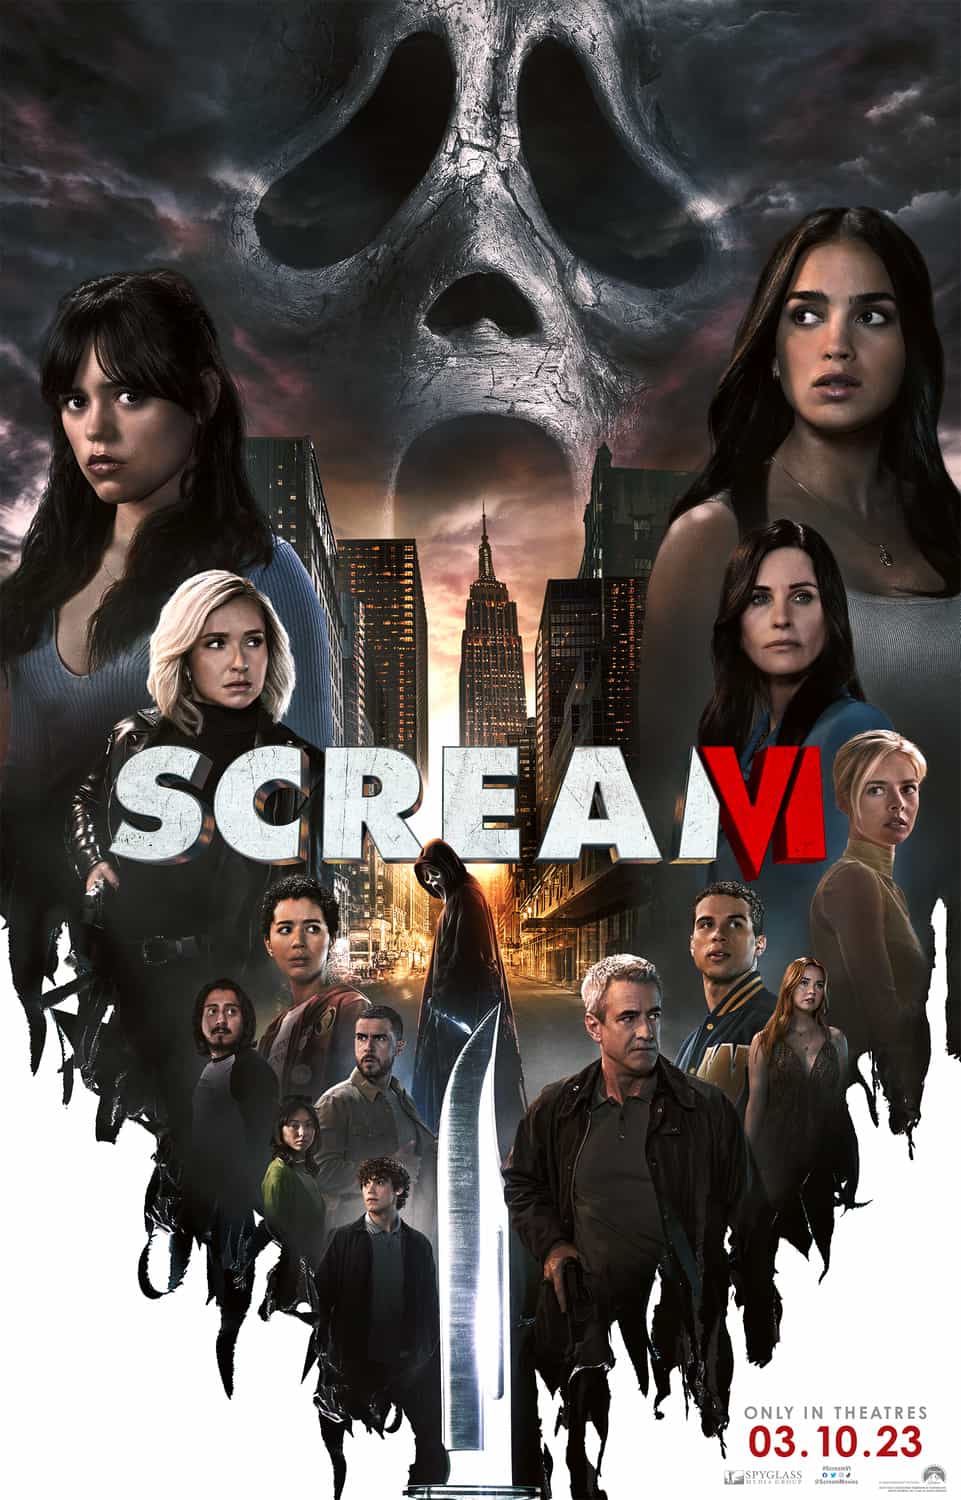 This weeks North American new movie preview 10th March 2023 - Scream VI, Luther, 65 and Champions - #screamvi #luther #65 #champions